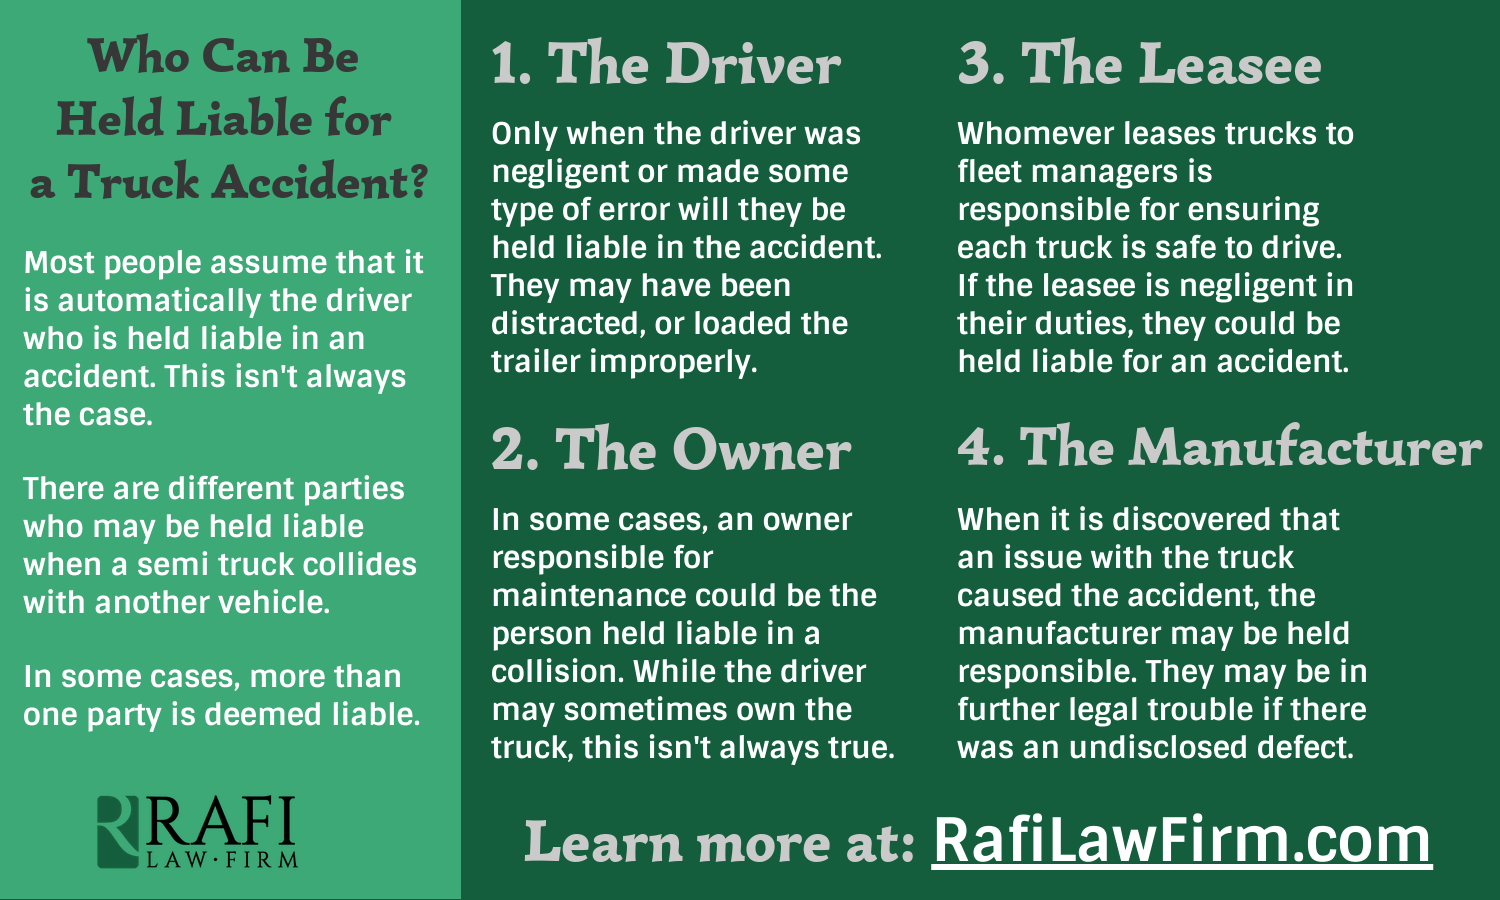 Who Can Be Held Liable for a Truck Accident infographic